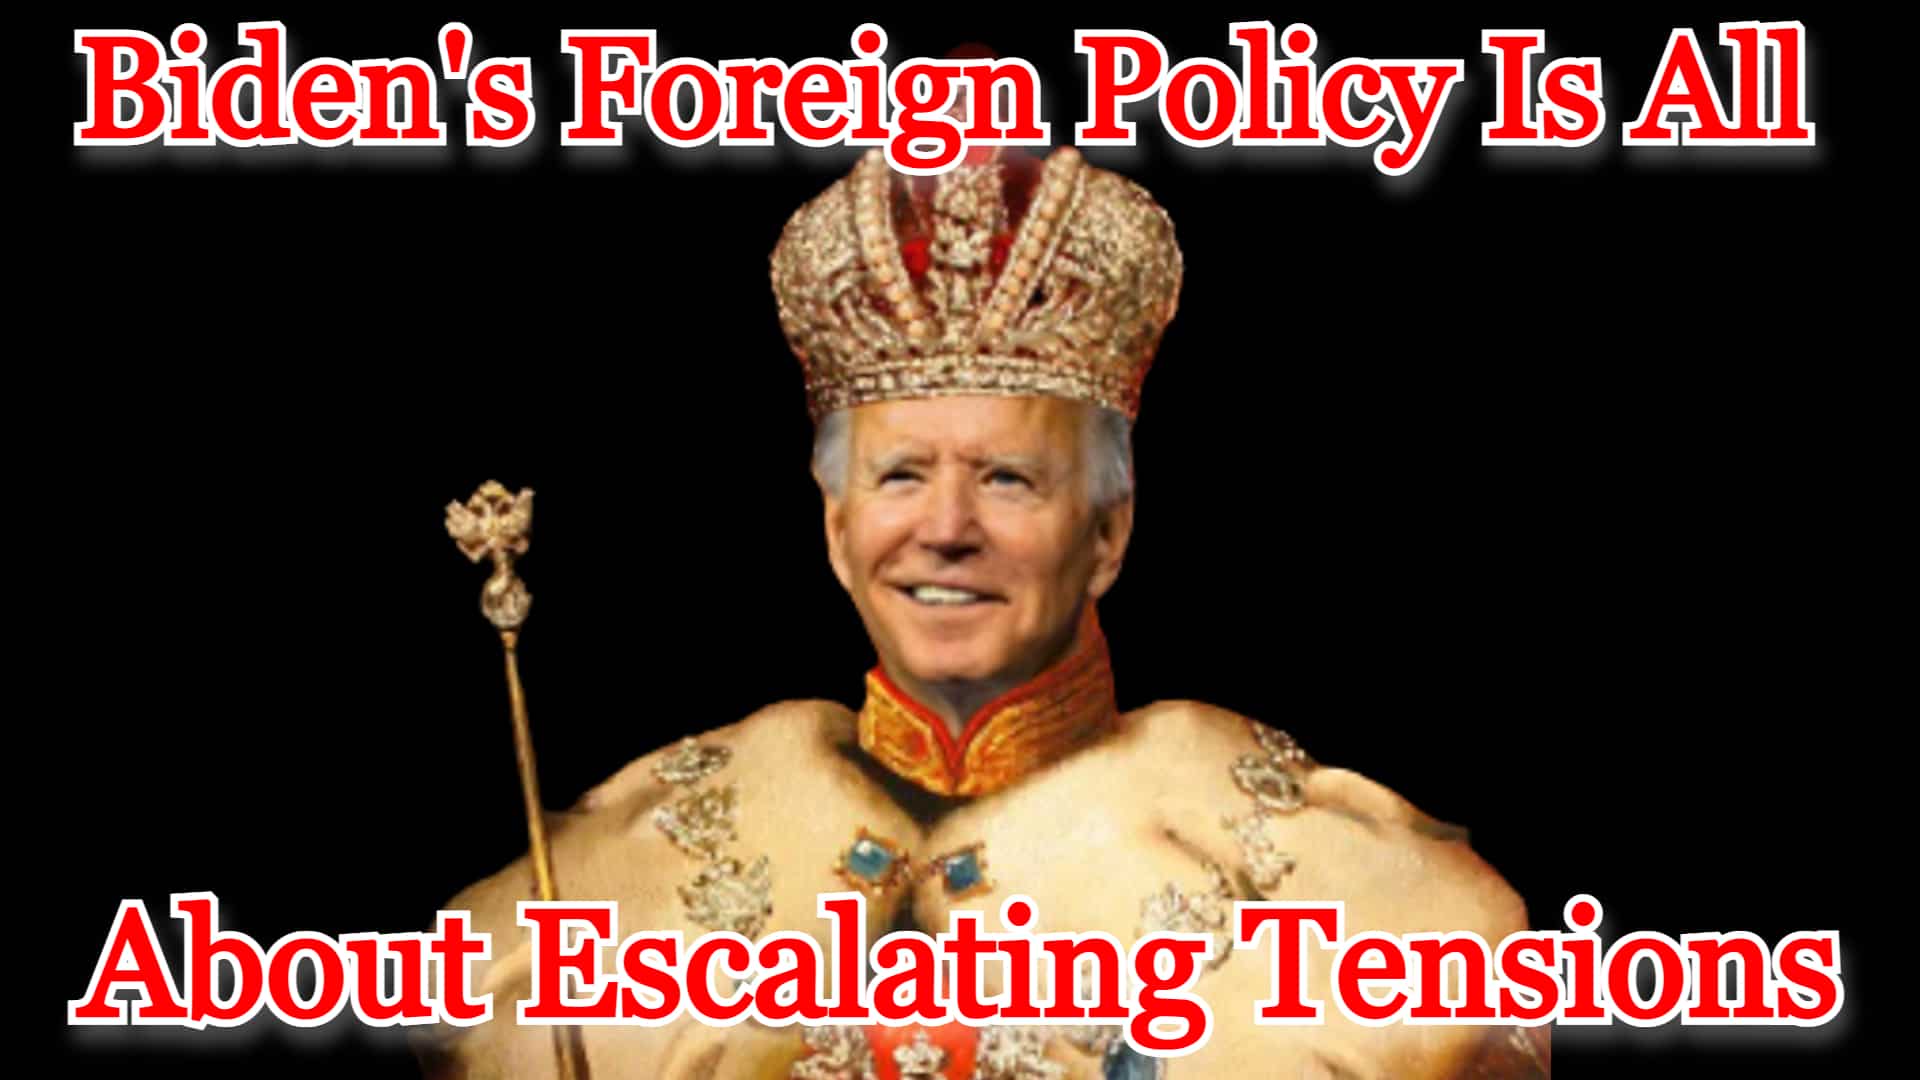 COI #415: Biden’s Foreign Policy Is All About Escalating Tensions